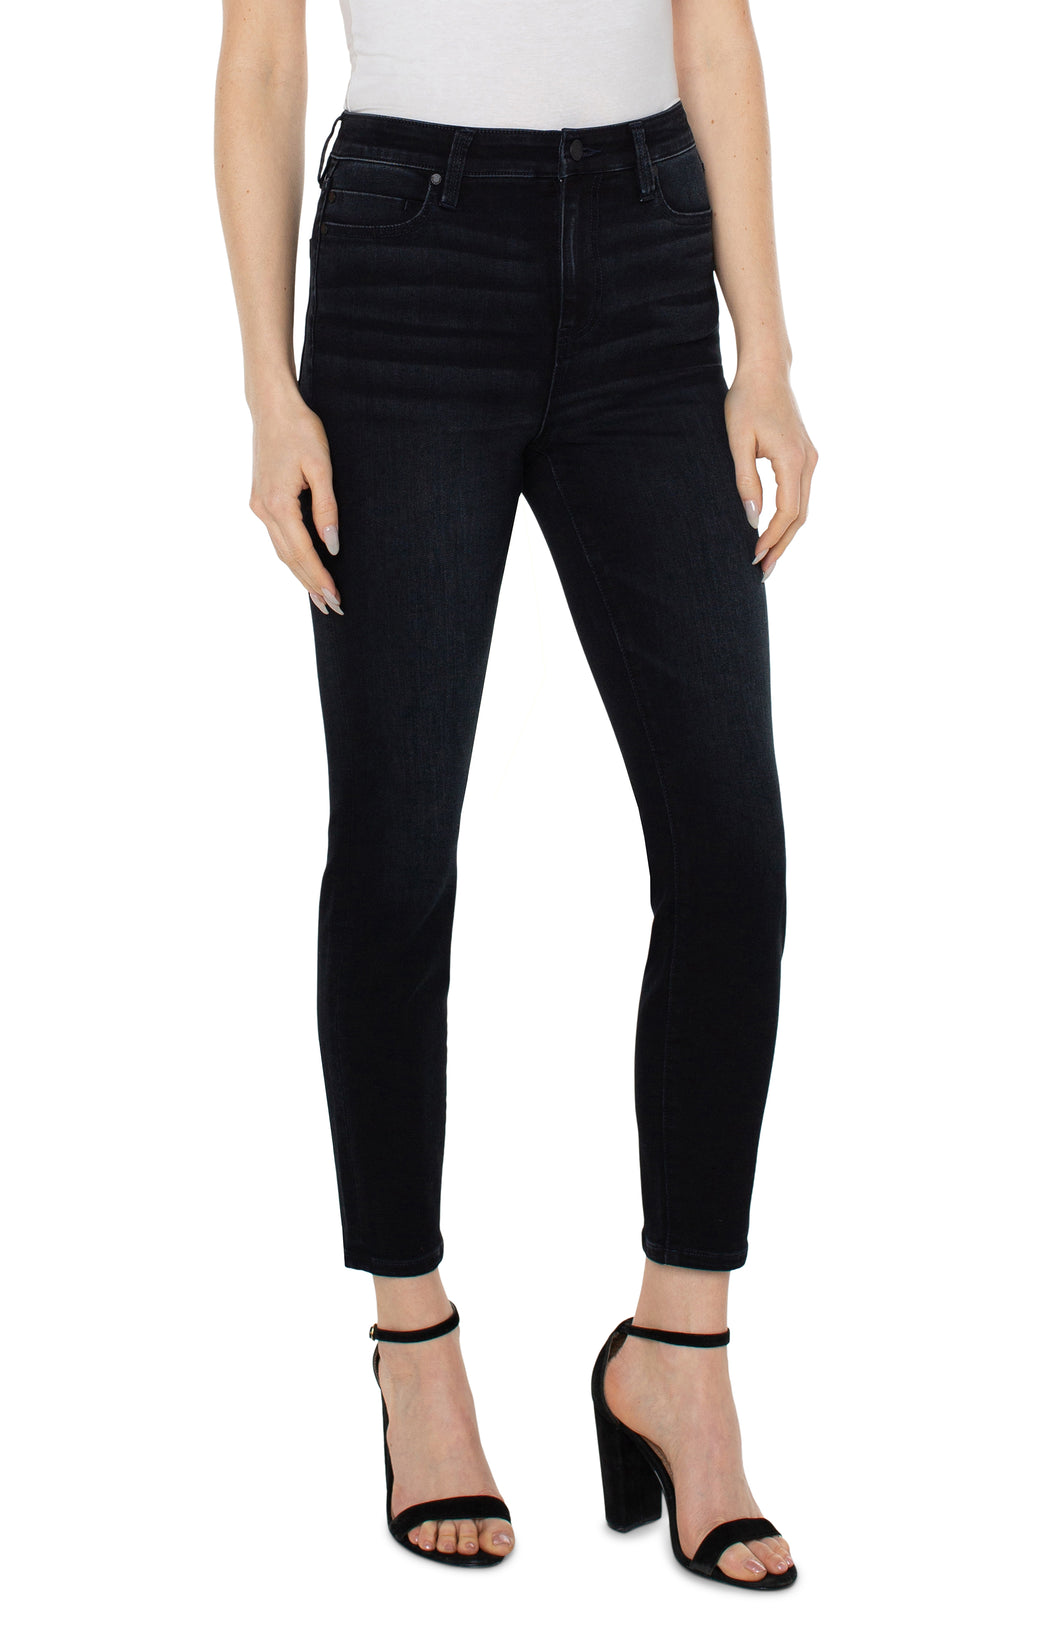 Liverpool Apollo Abby Hi-Rise Ankle Skinny Jeans